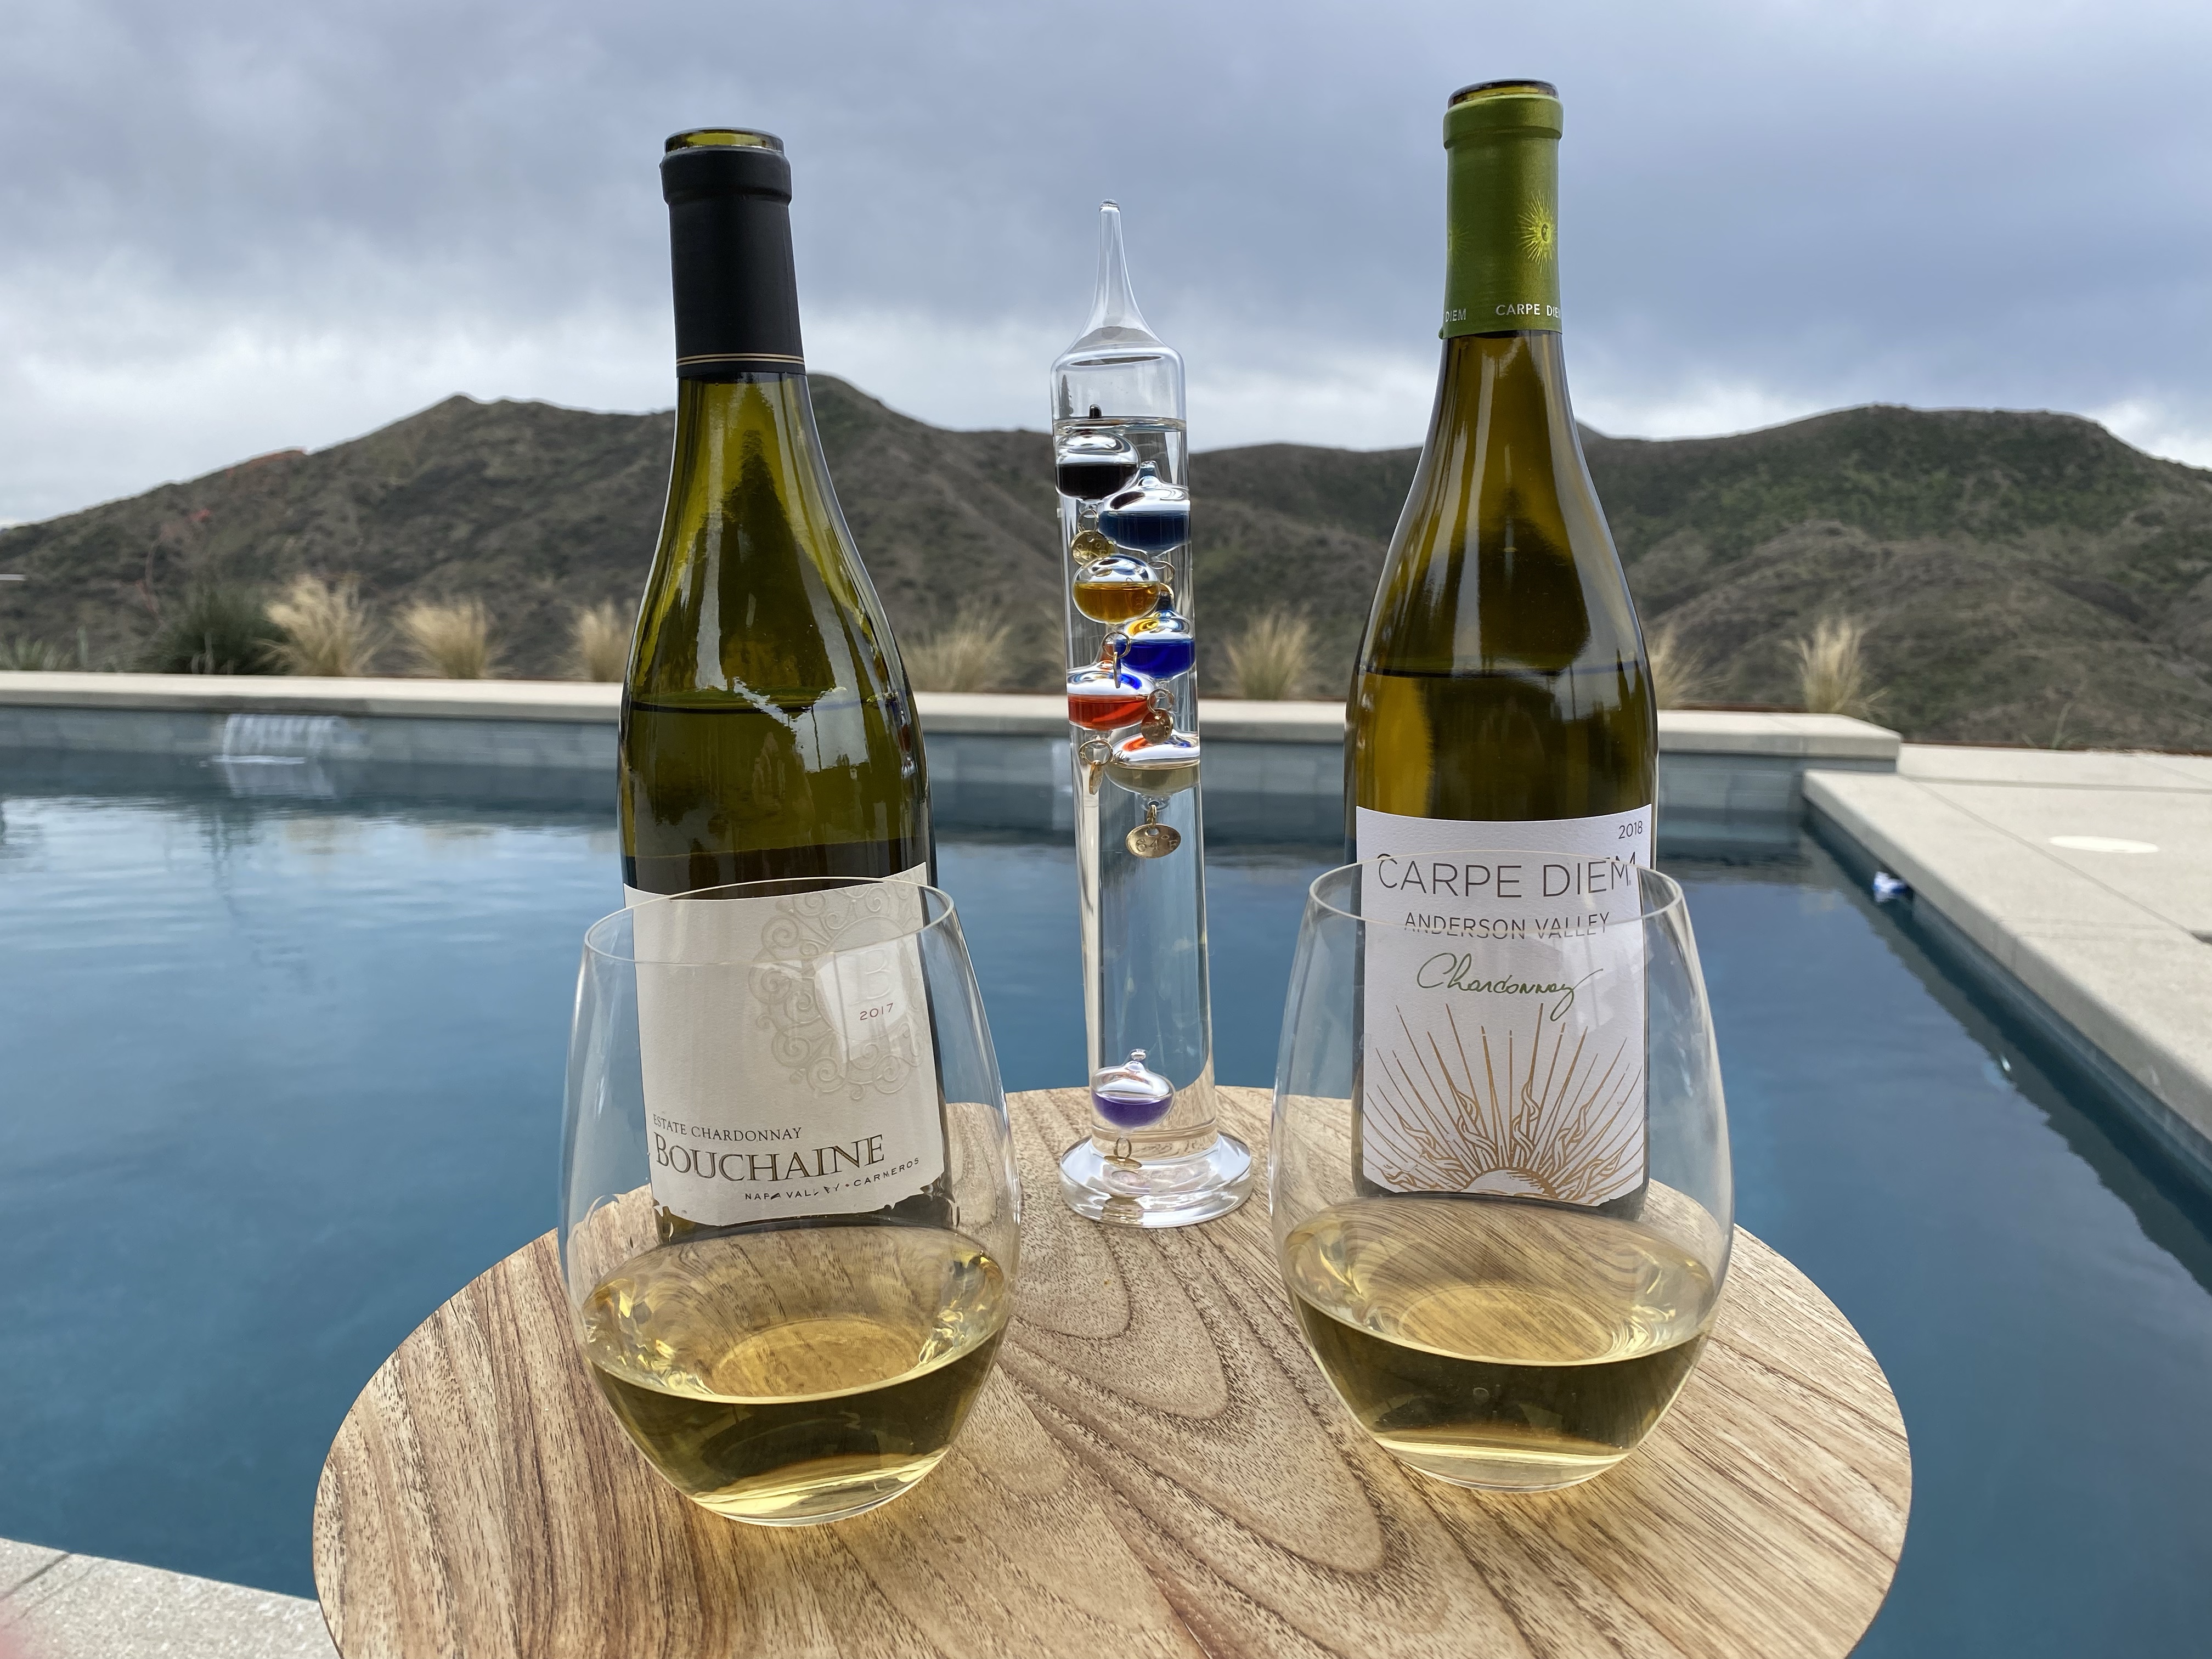 Bottle and glass of 2017 Bouchaine Chardonnay and Carpe Diem Chadonnary